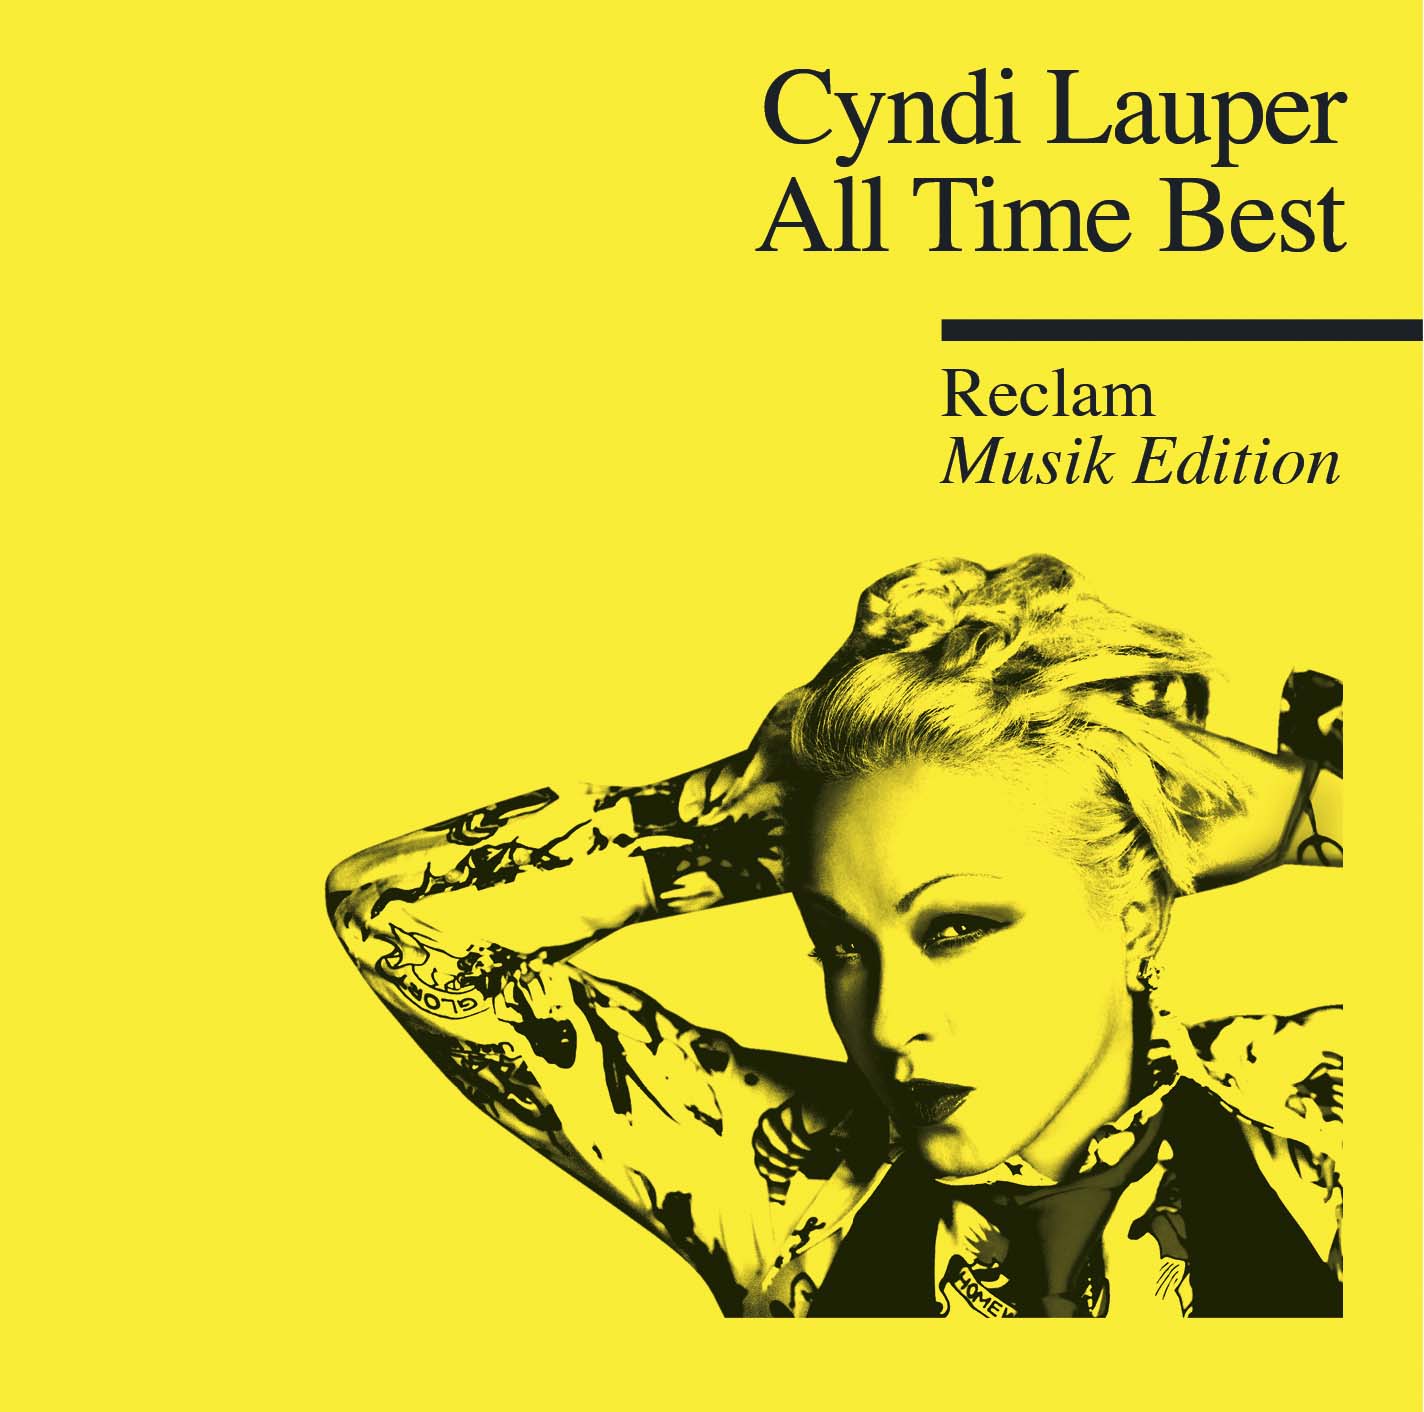 Cyndi Lauper – “All Time Best – (Reclam Musik Edition)“ (Epic/Sony Music)